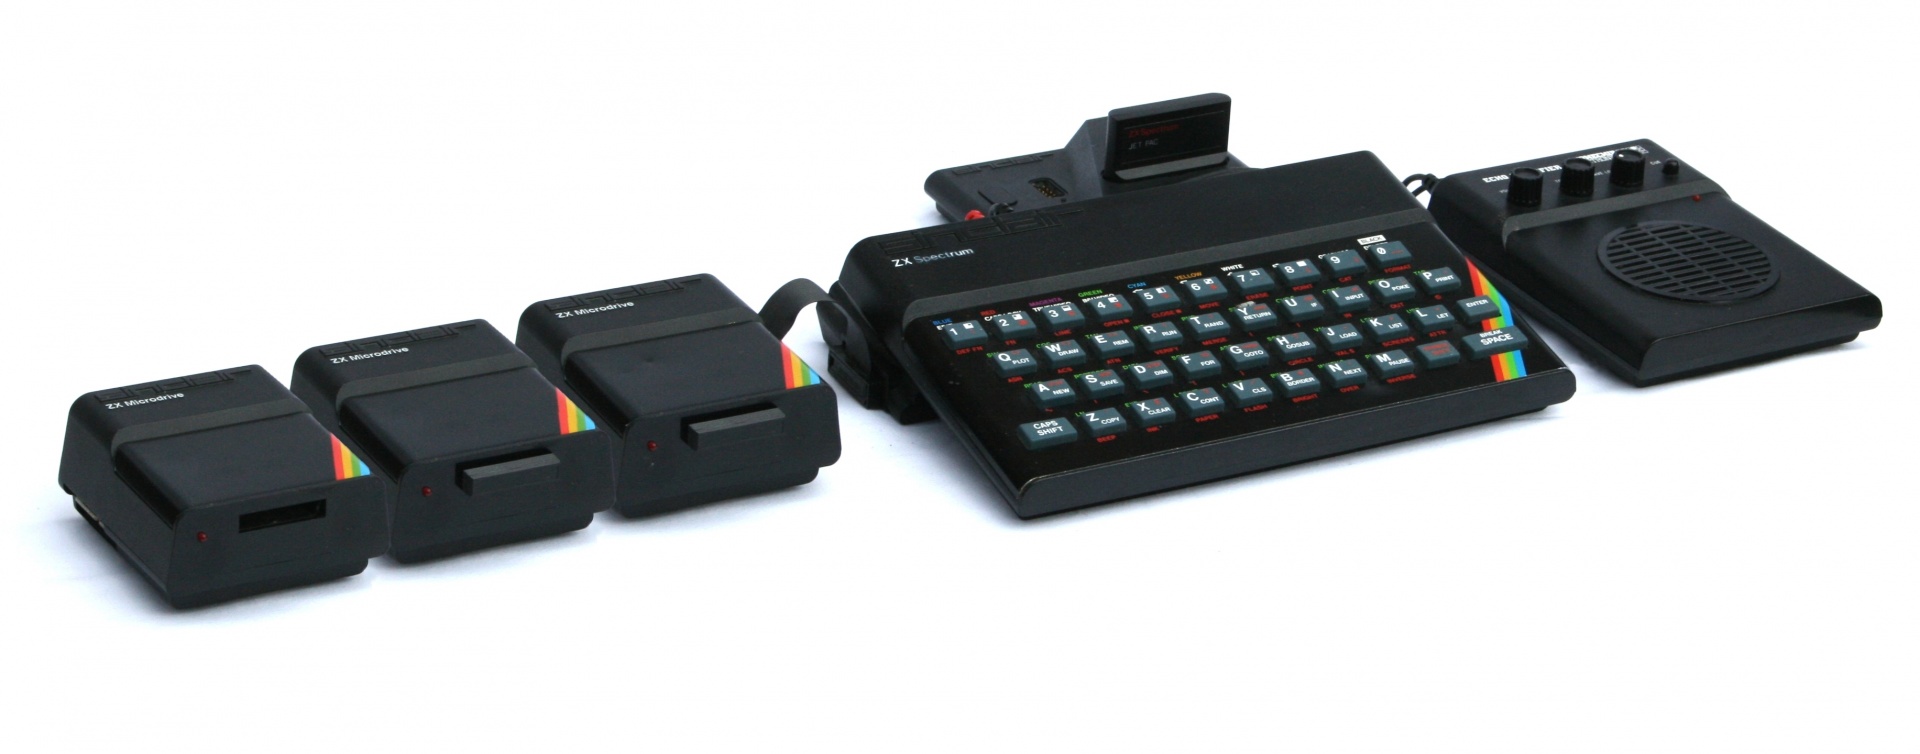 ZX Spectrum And Three Microdrives